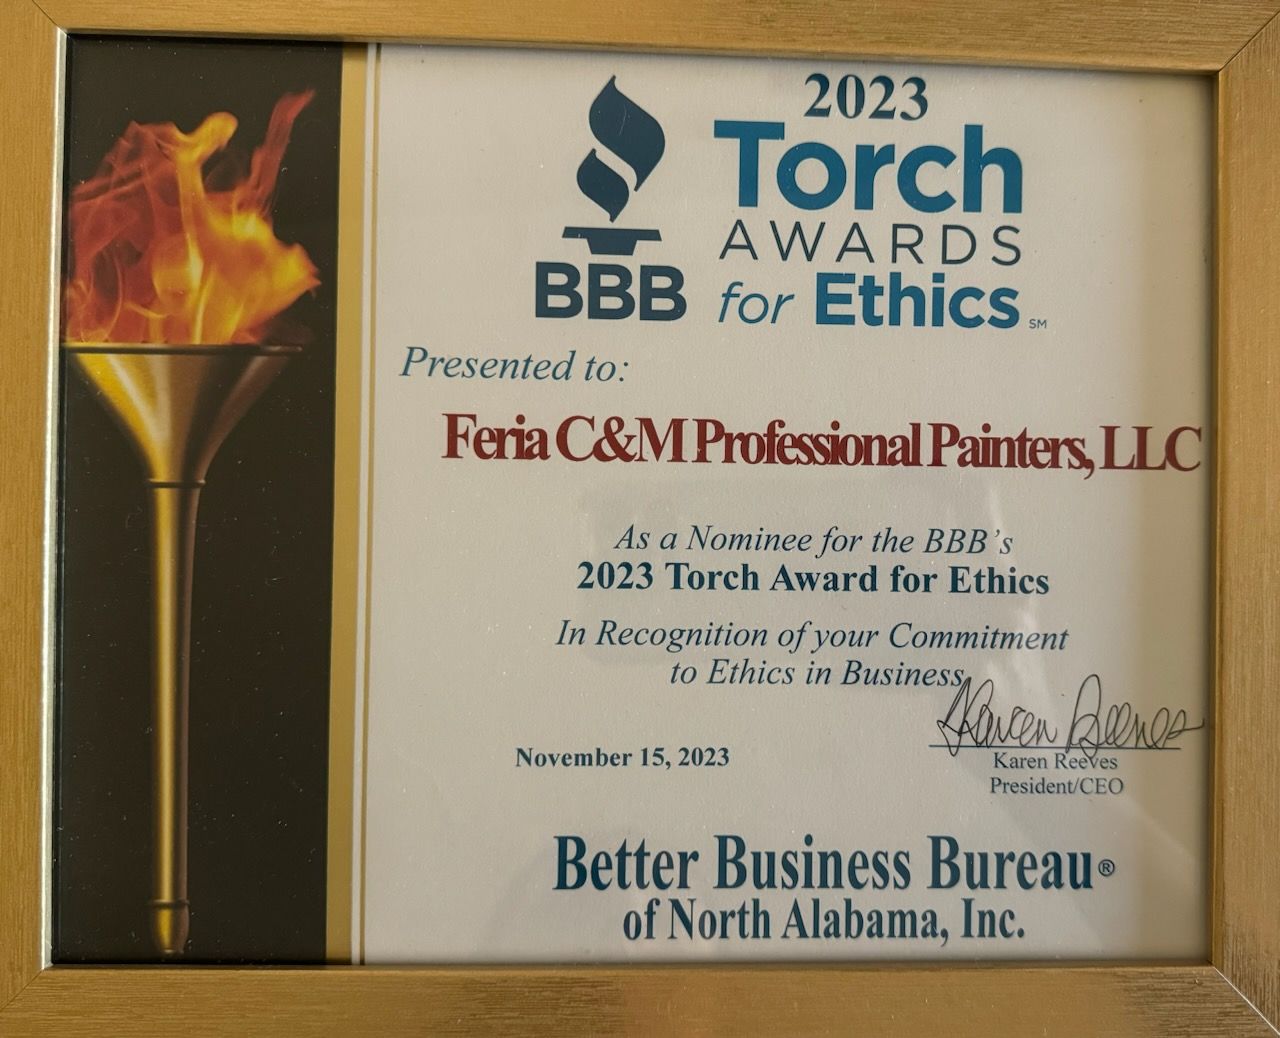 A torch award for ethics is presented to faria c & m professional painters llc